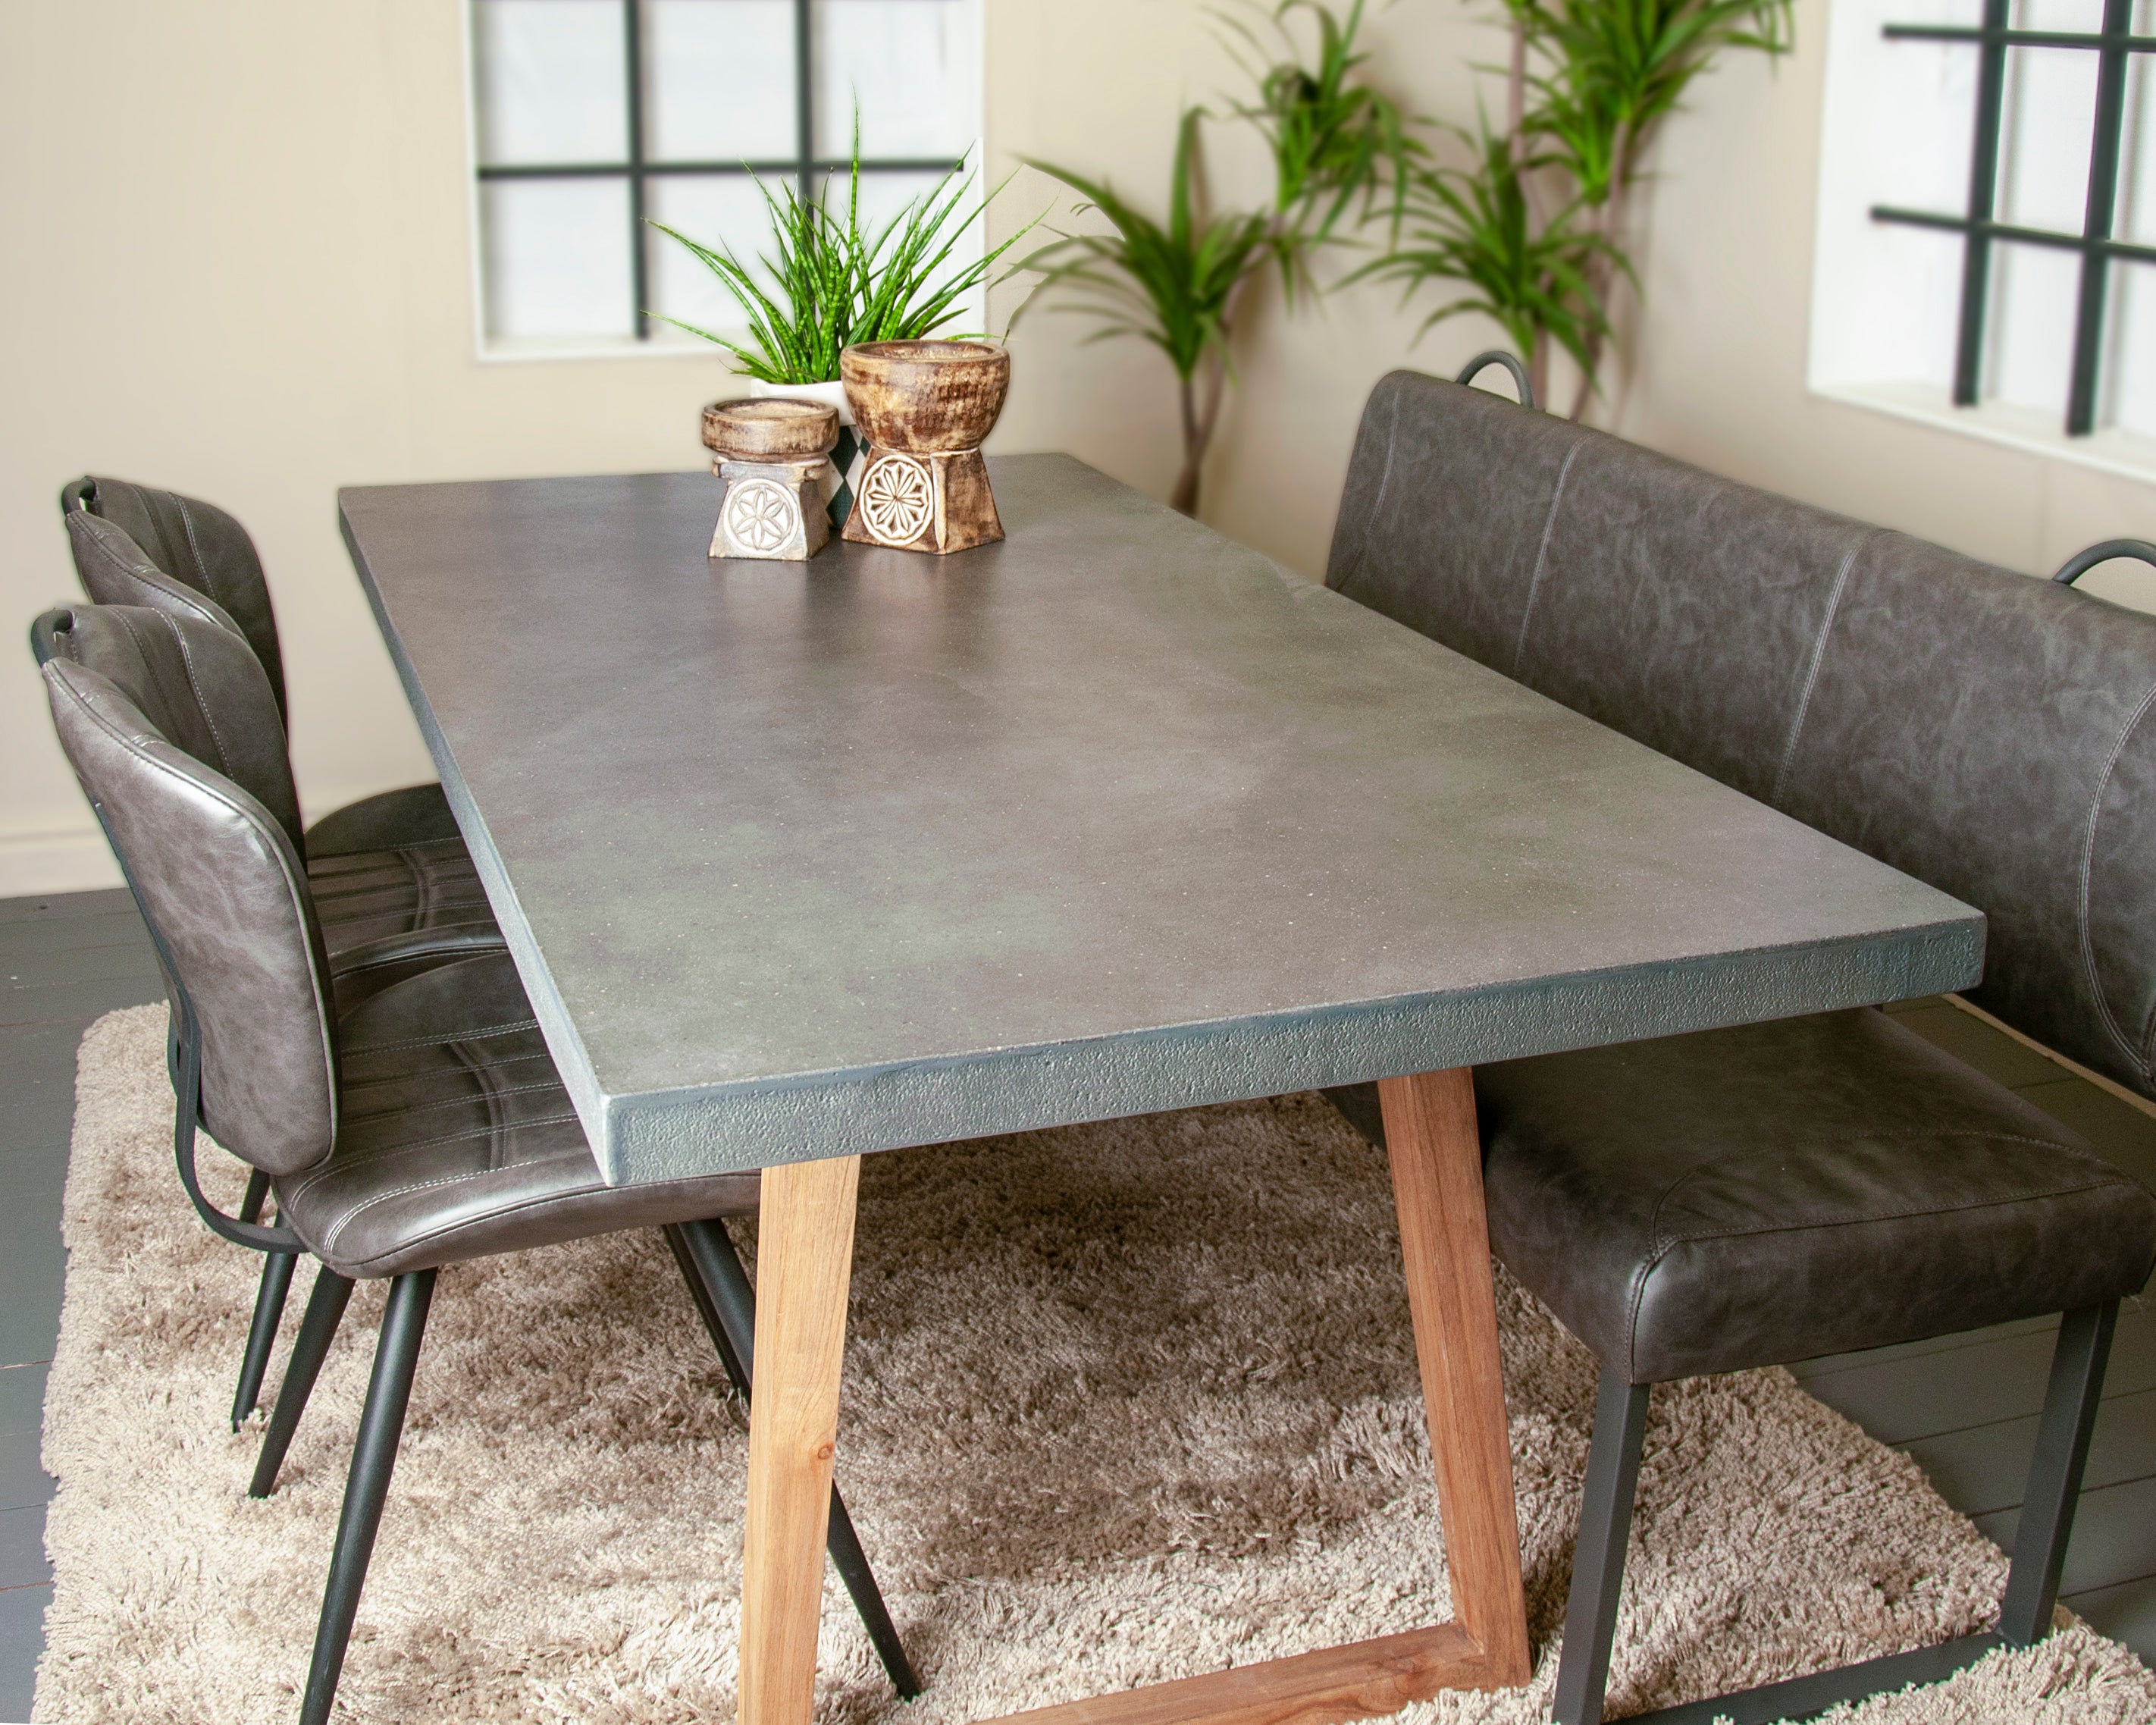 Aspect Rectangle Dining Table